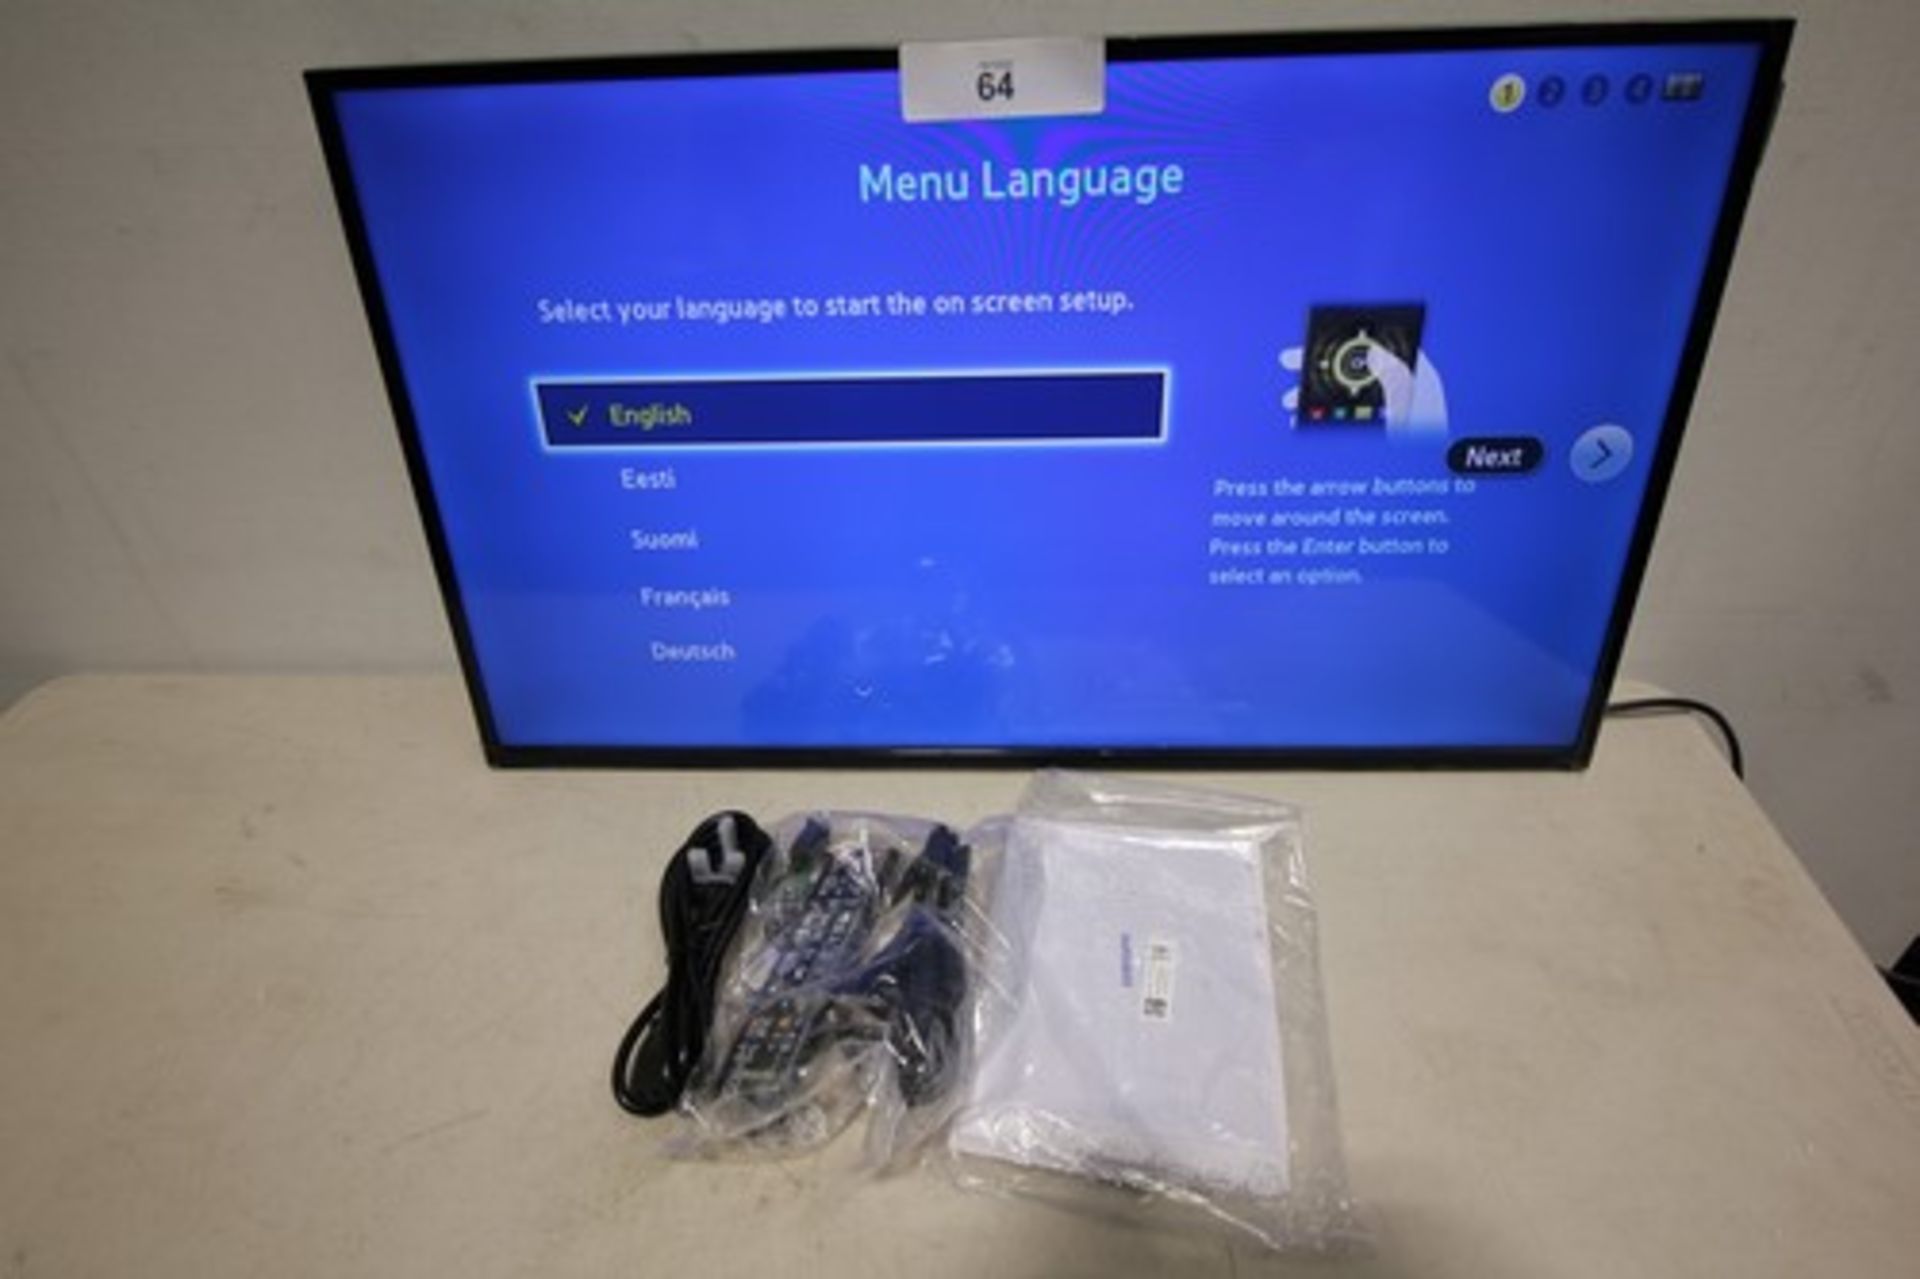 1 x Samsung 32" professional display TV, model DC32E, powers on ok but not fully tested - new in box